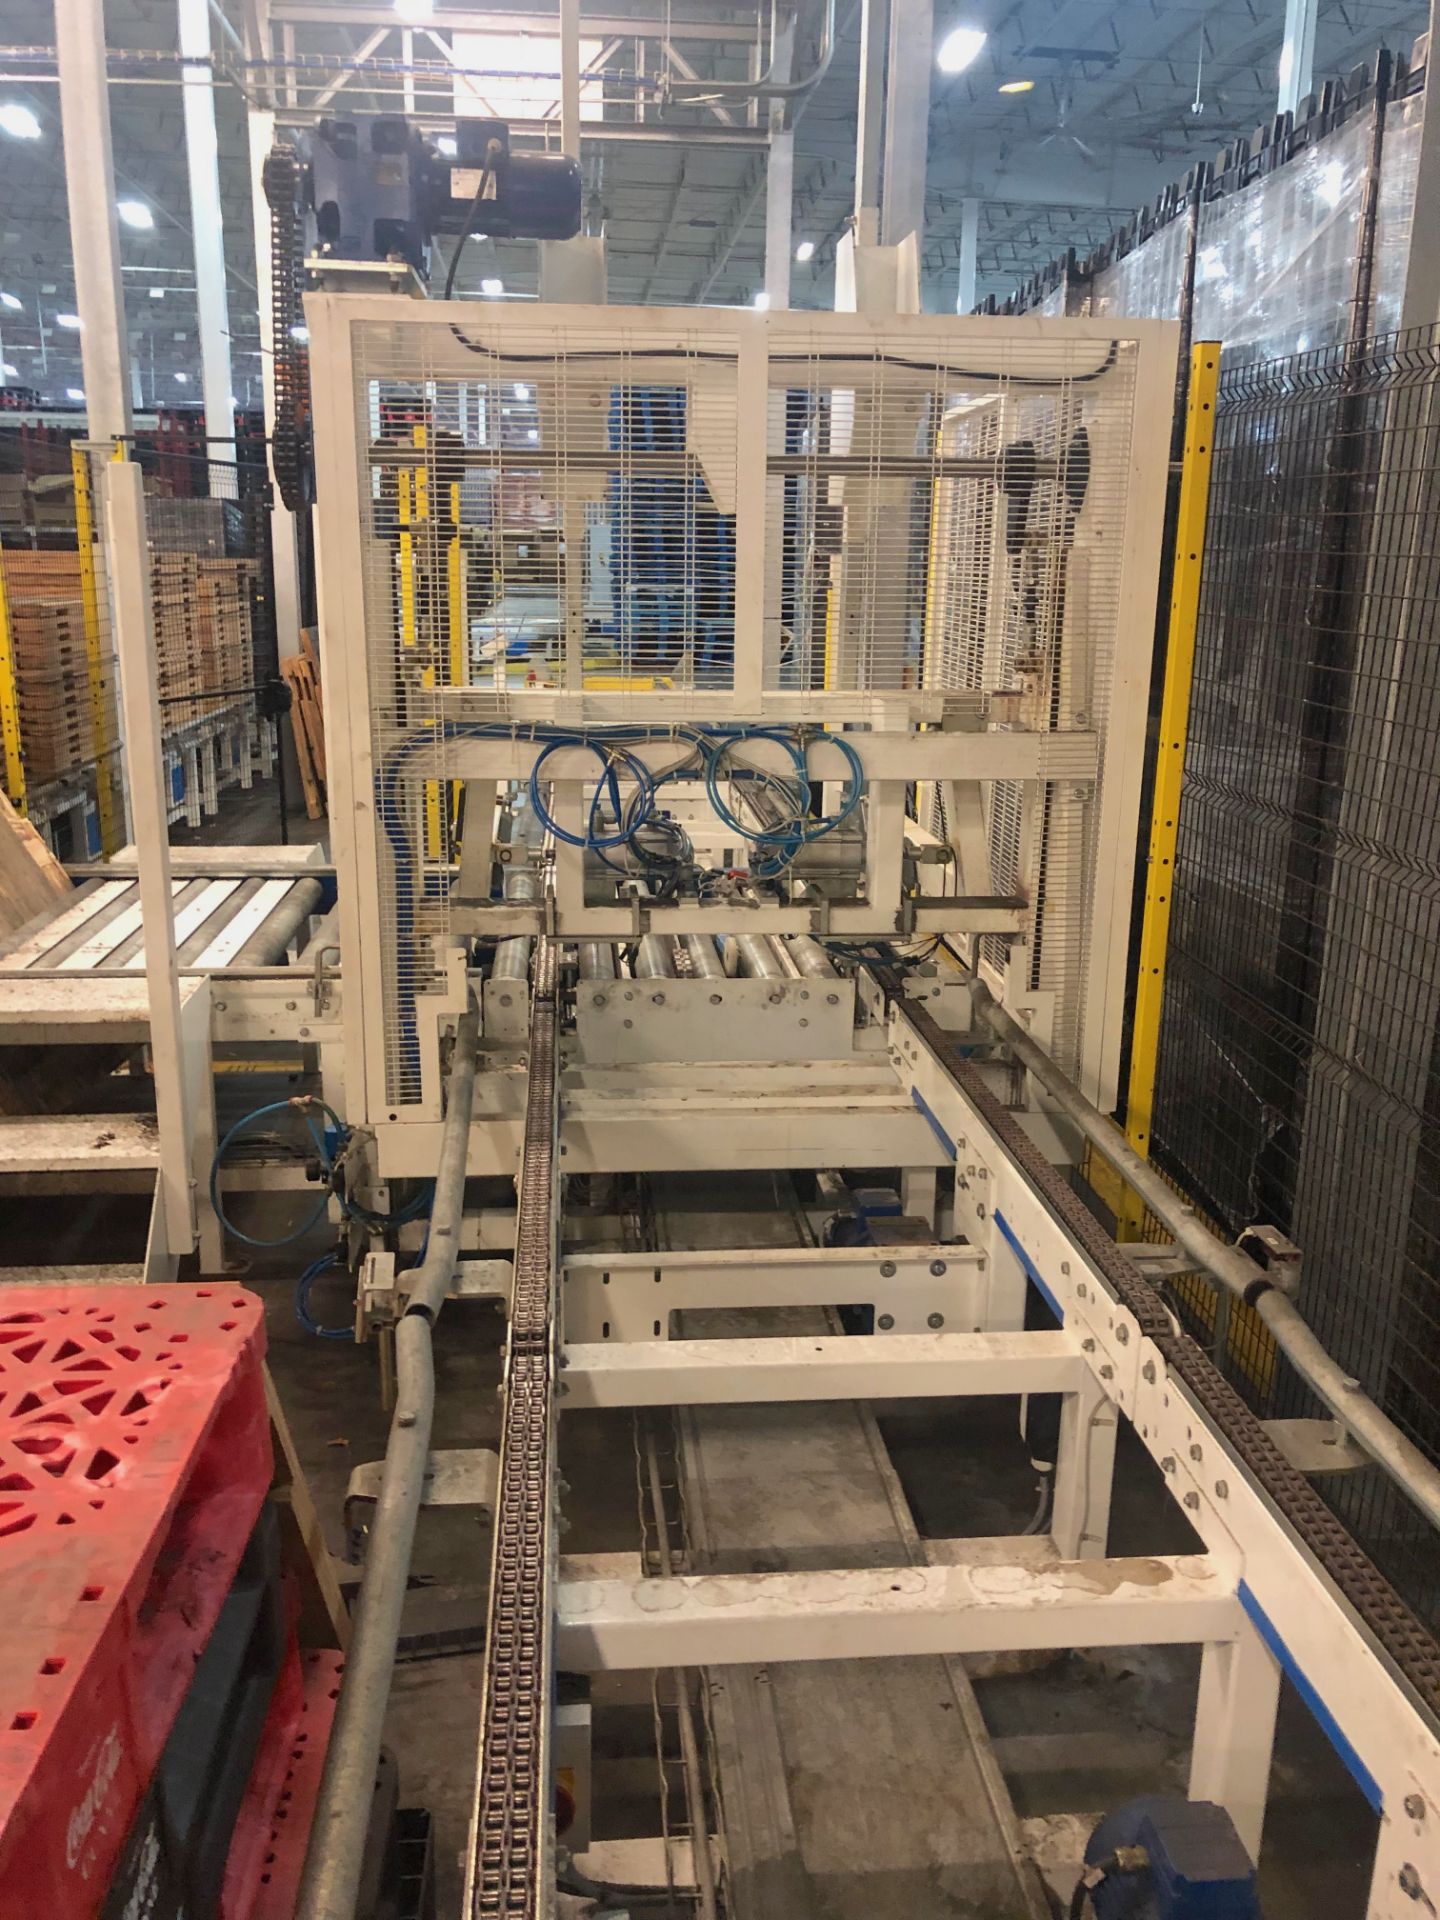 Pallet Dispenser Loading Area (to Feed Pallets to Robotic Palletizers) - Image 15 of 17